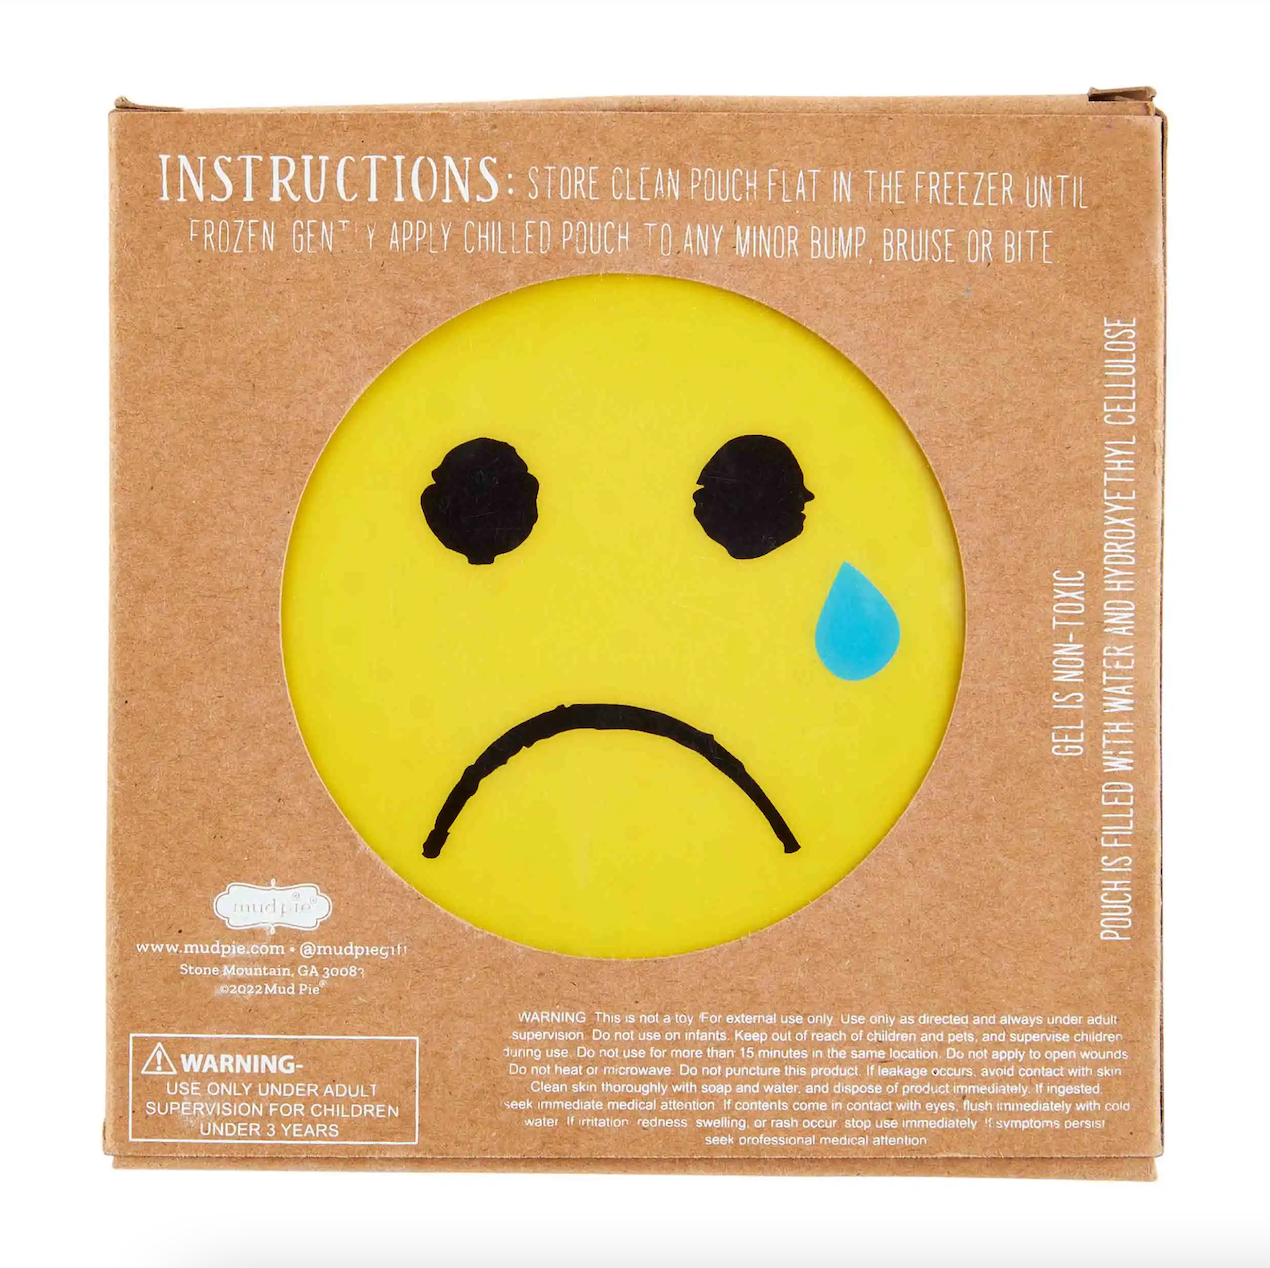 Emotion Face Ouch Pouch